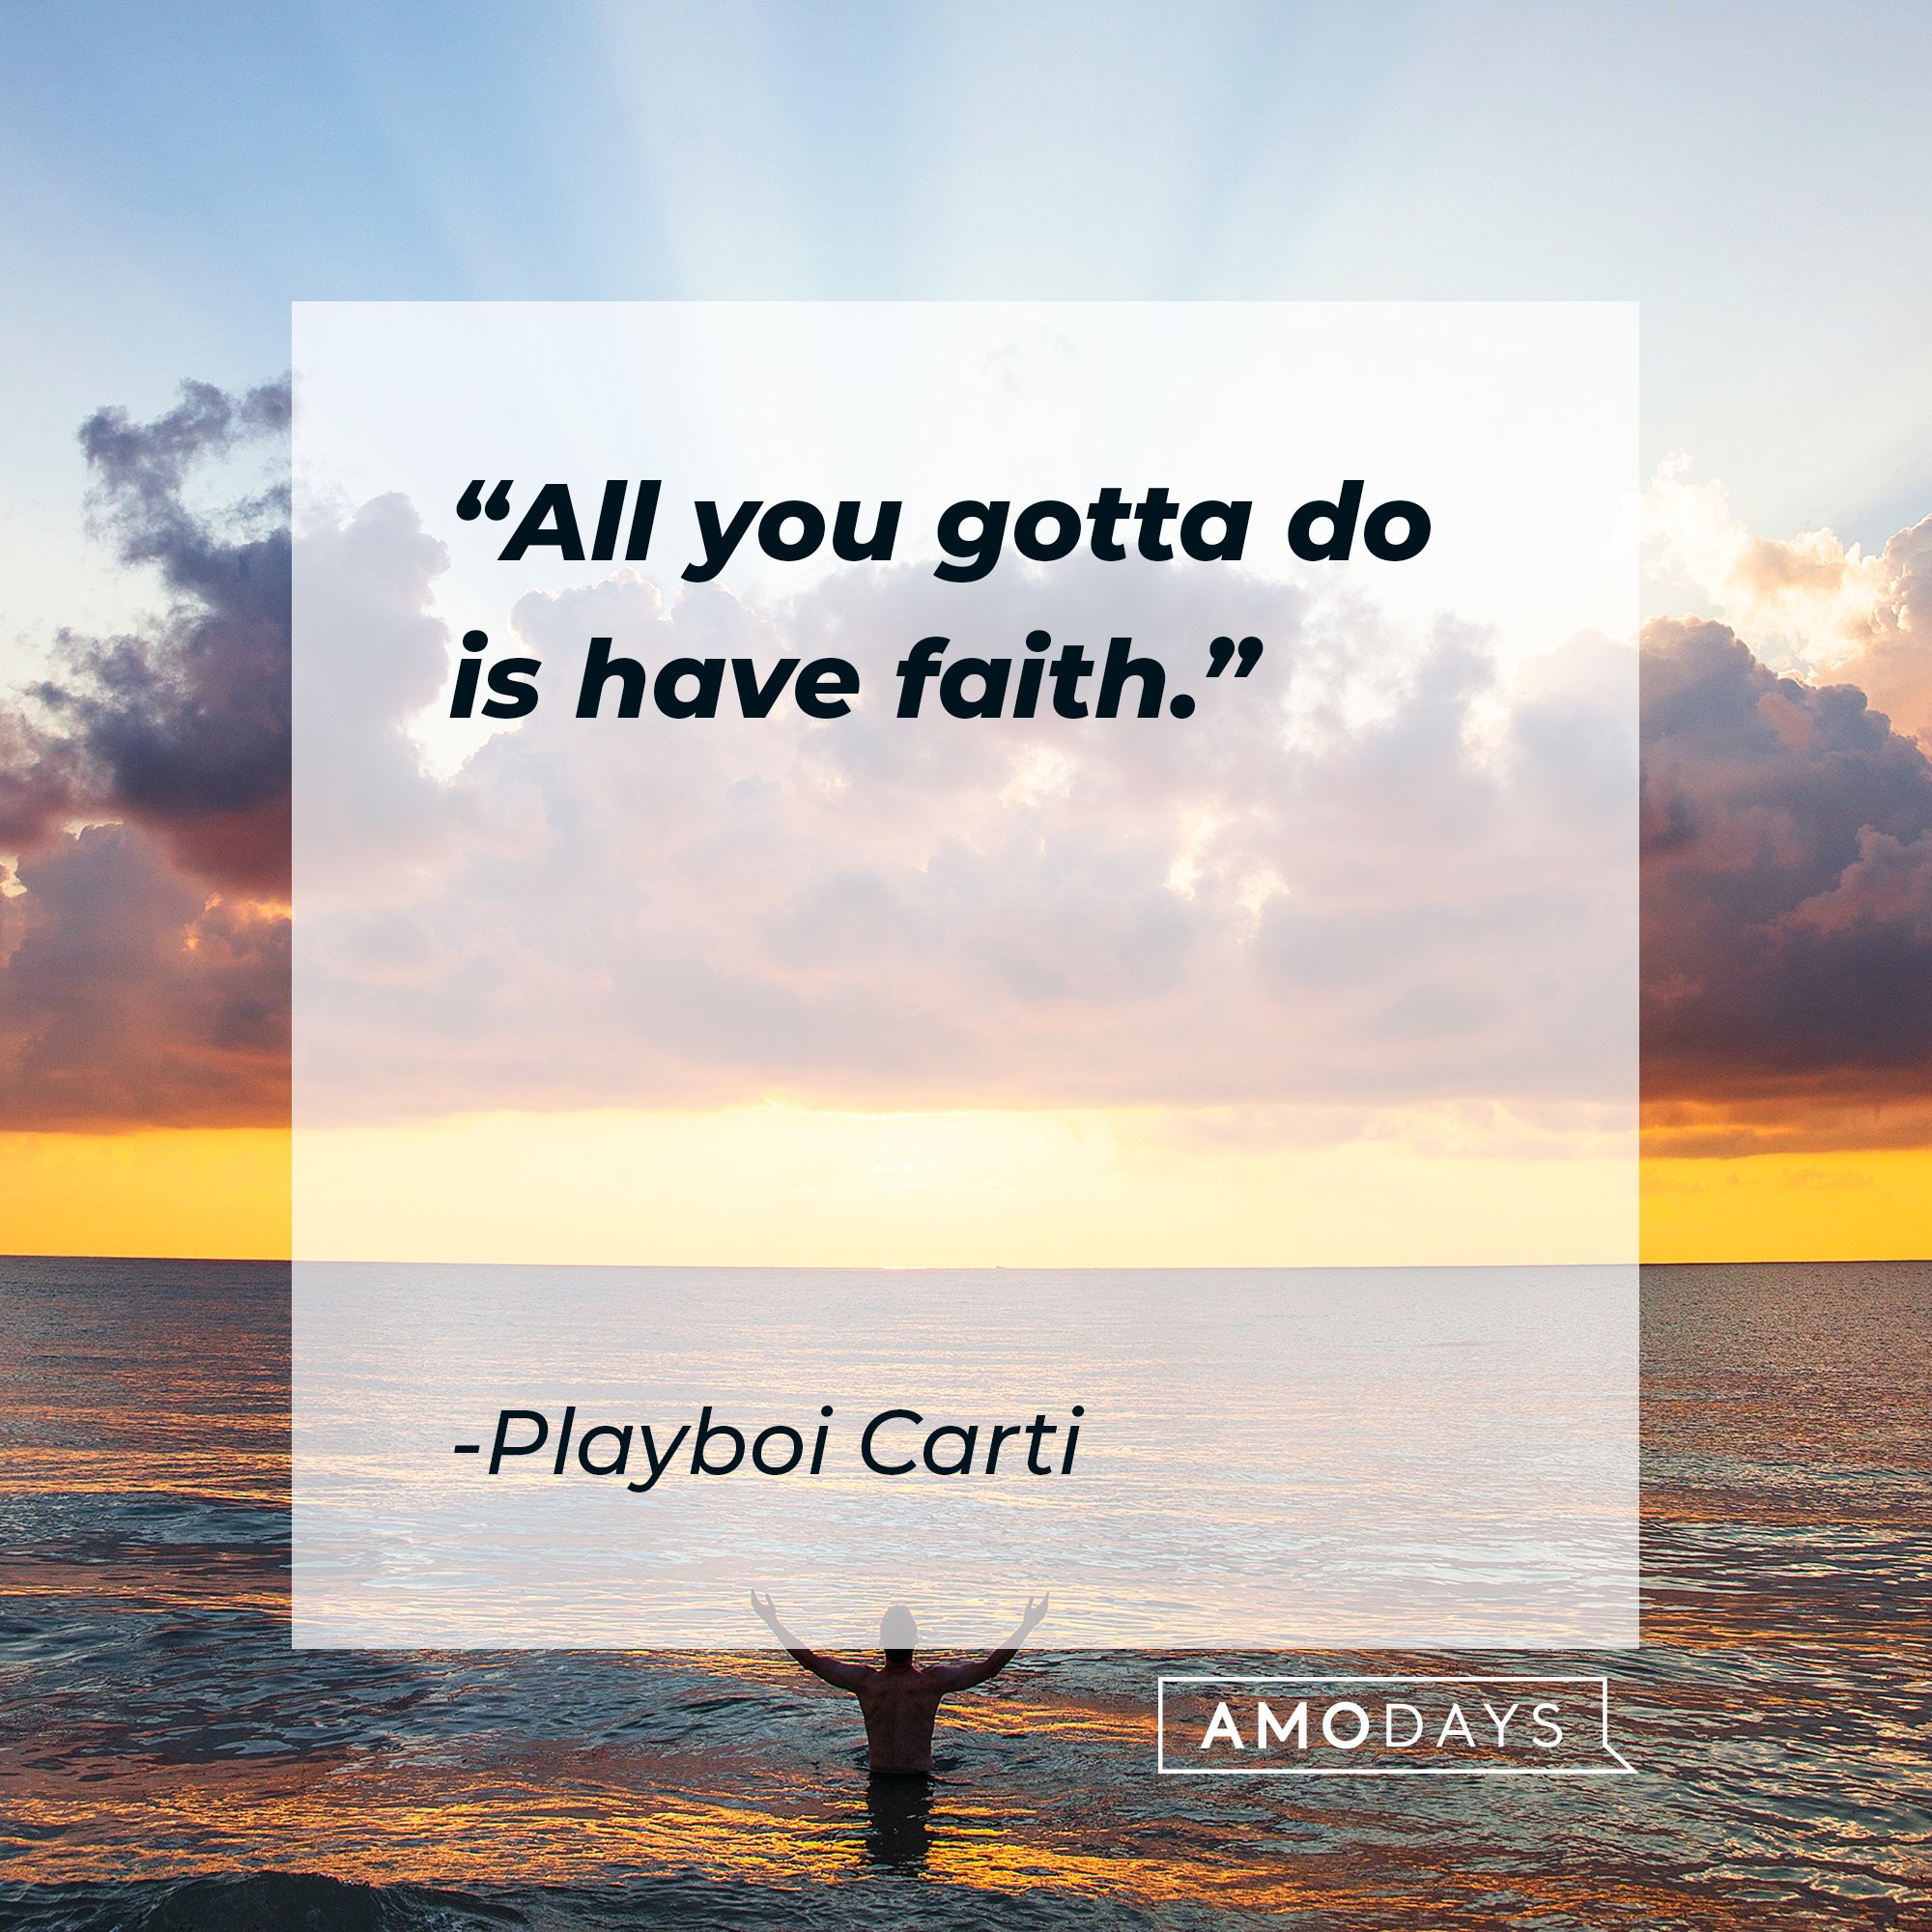  Playboi Carti ‘s quote: "All you gotta do is have faith." | Image: AmoDays